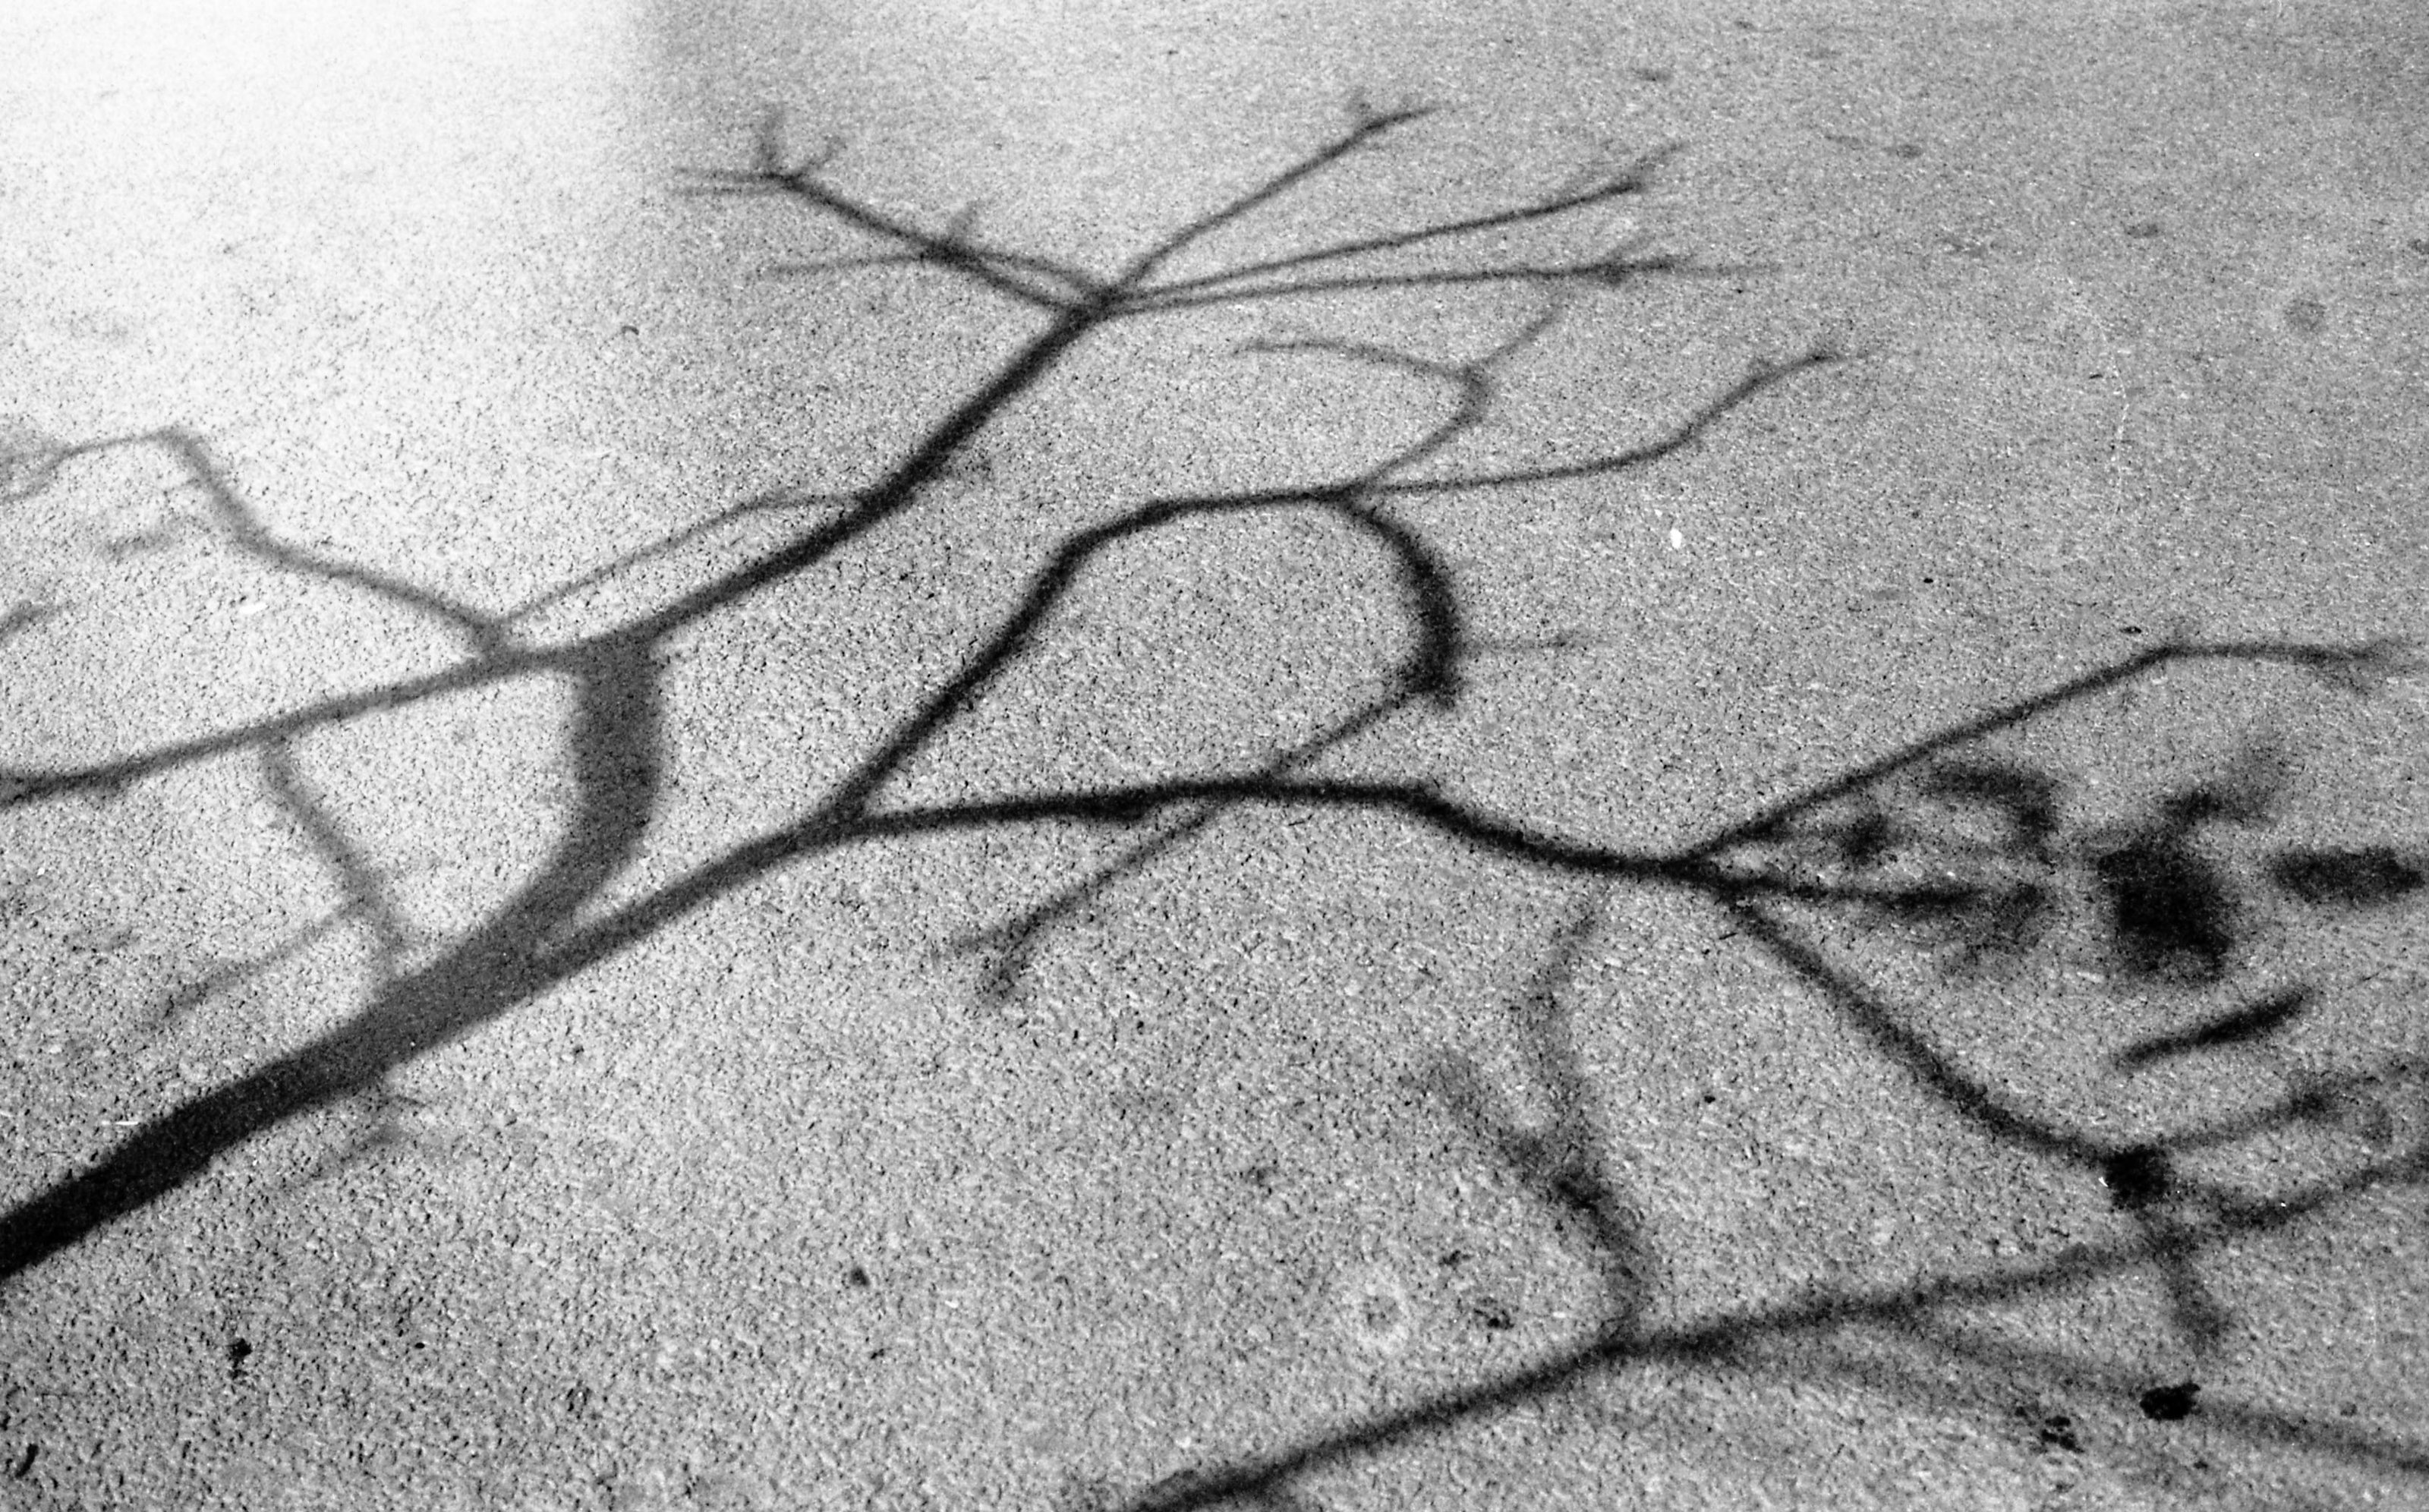 The shadow of a leafless tree's branches cast upon gray ground.